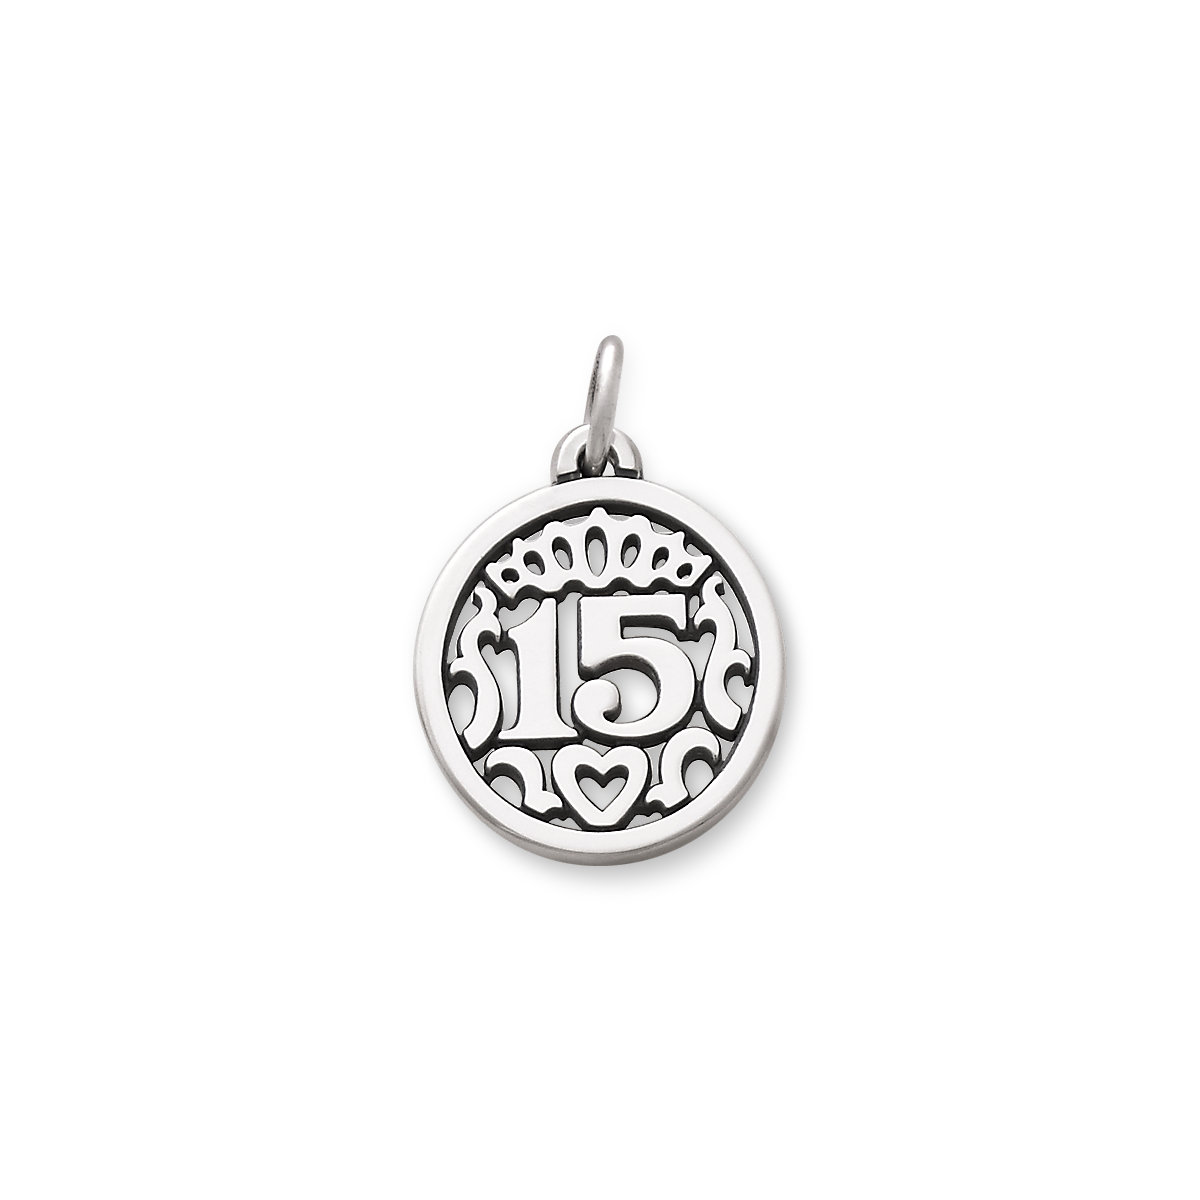 Birthday Charms Gifts Jewelry James Avery